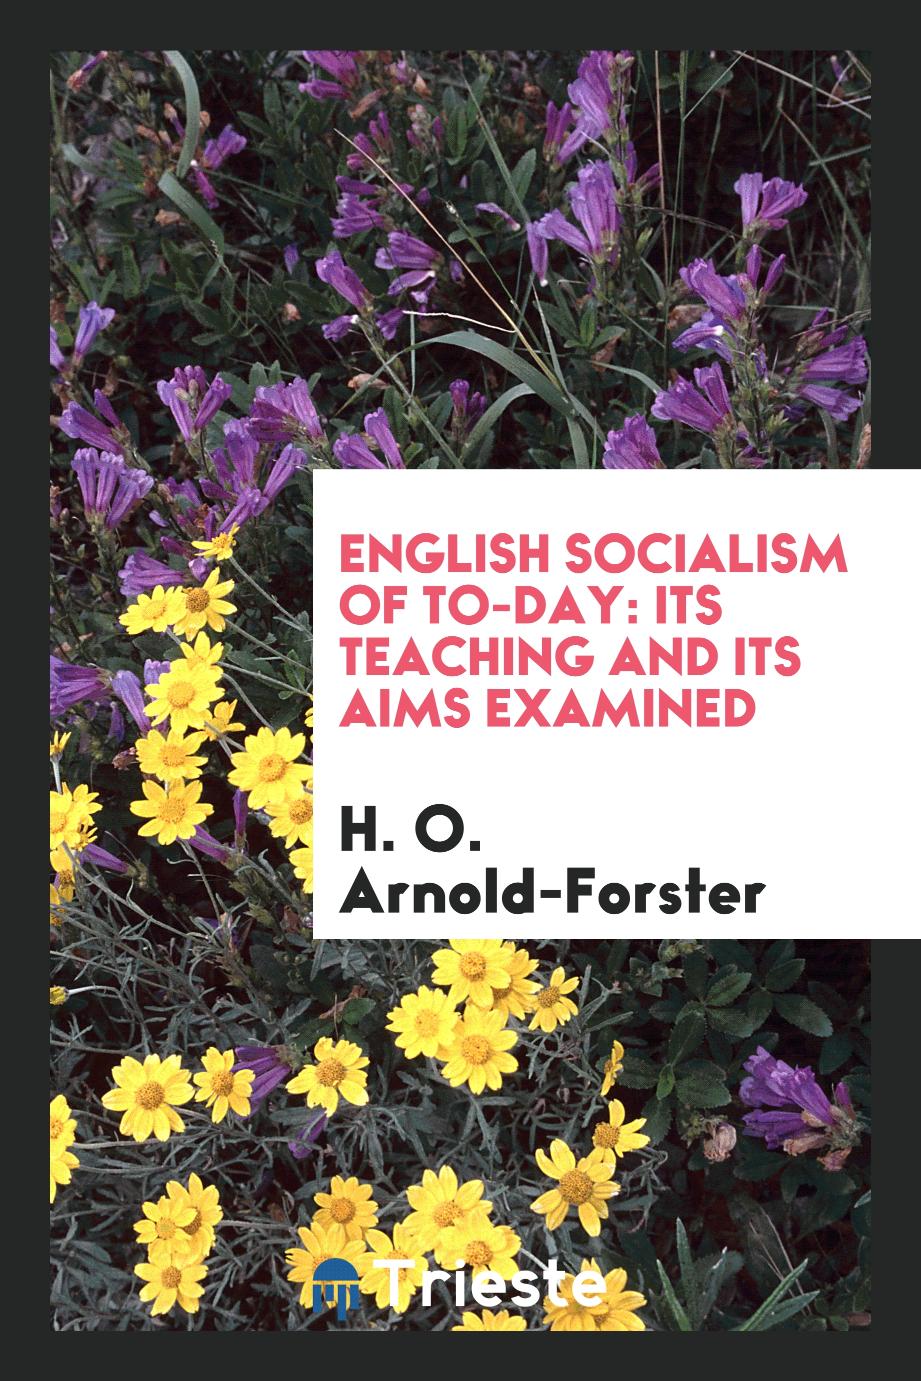 H. O. Arnold-Forster - English Socialism of To-Day: Its Teaching and Its Aims Examined